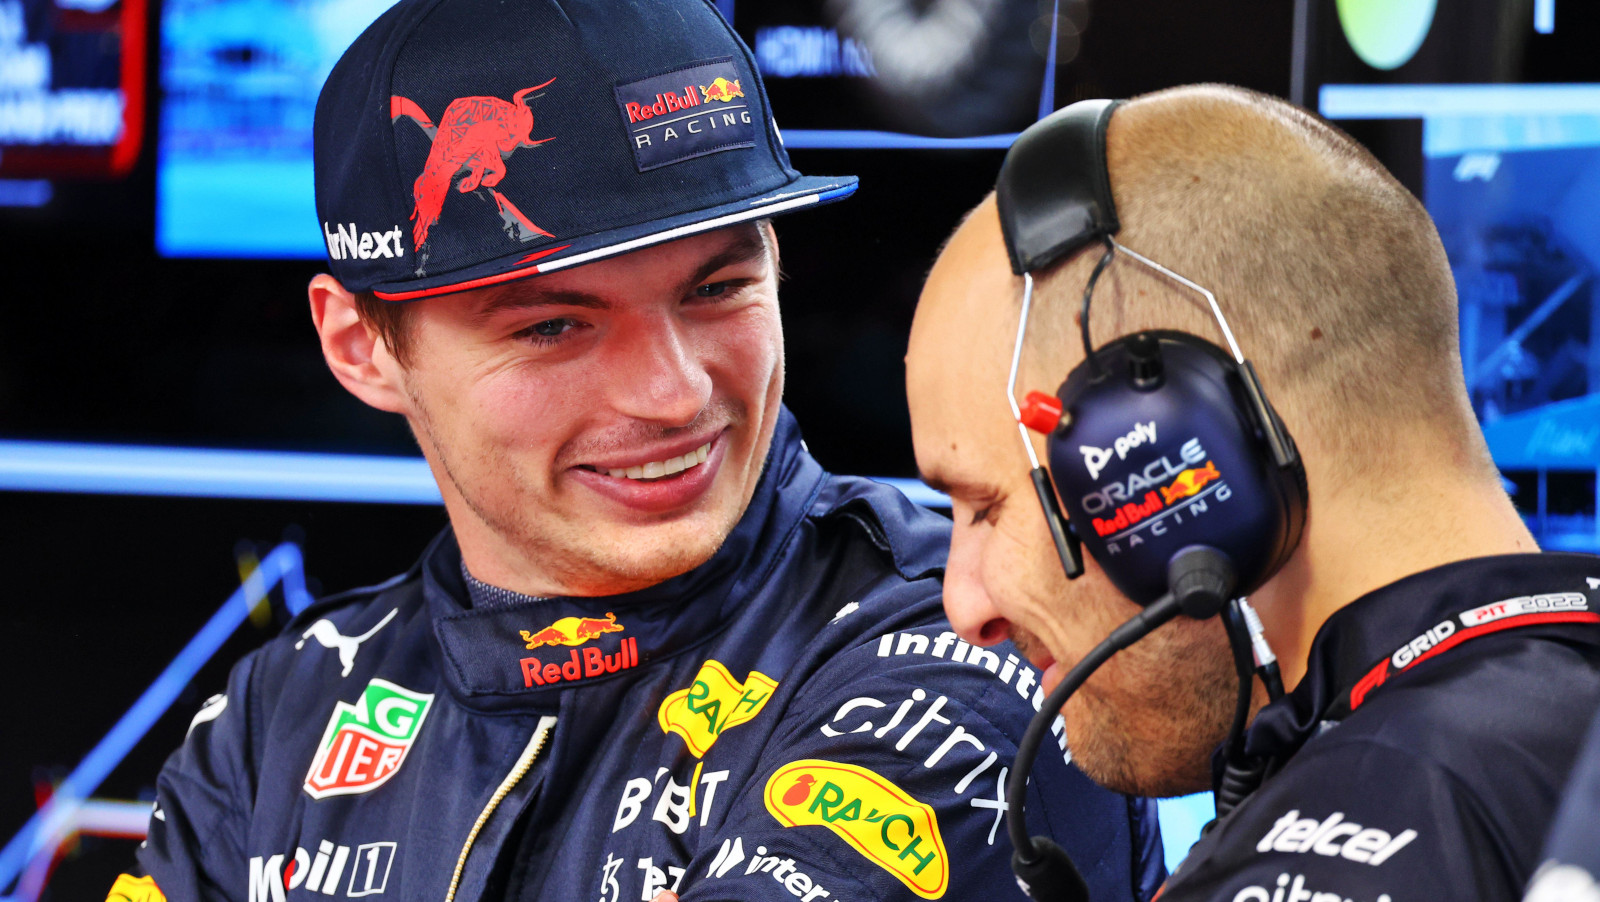 Max Verstappen smiling with his race engineer Gianpiero Lambiase. Miami May 2022